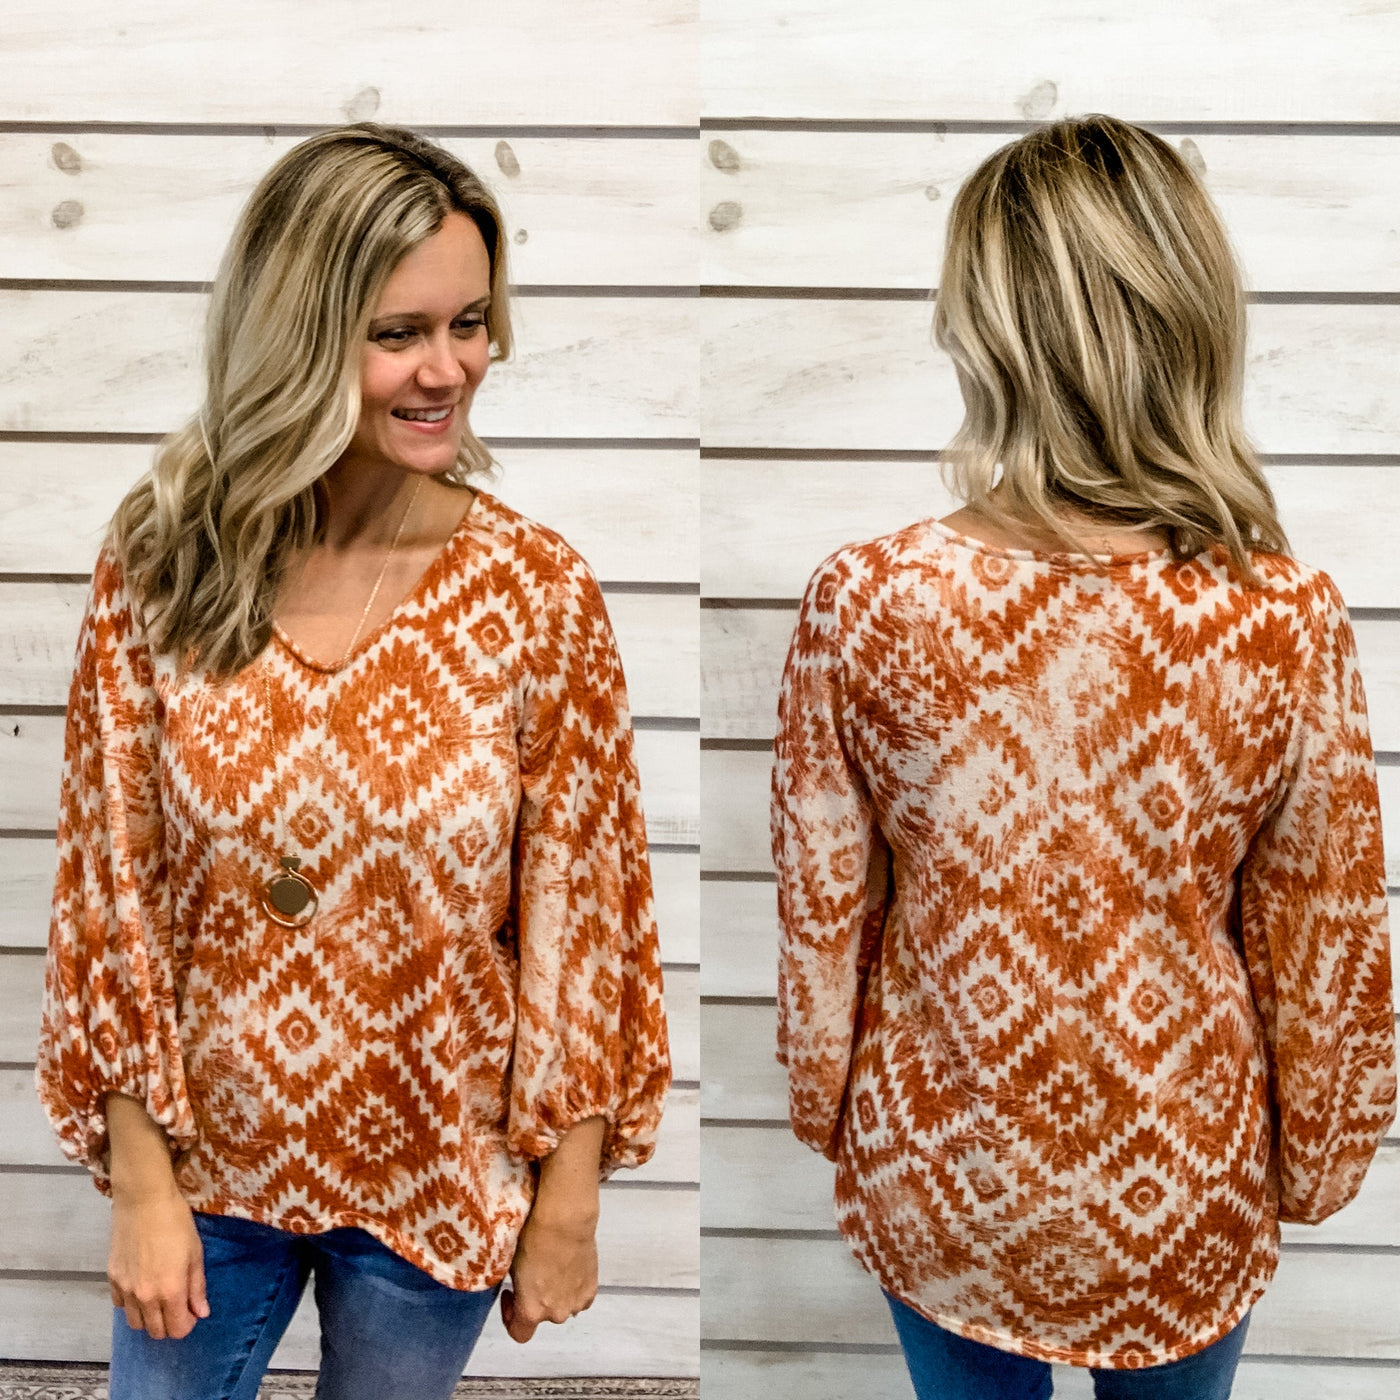 Brick Textured Print Top with Balloon Sleeves